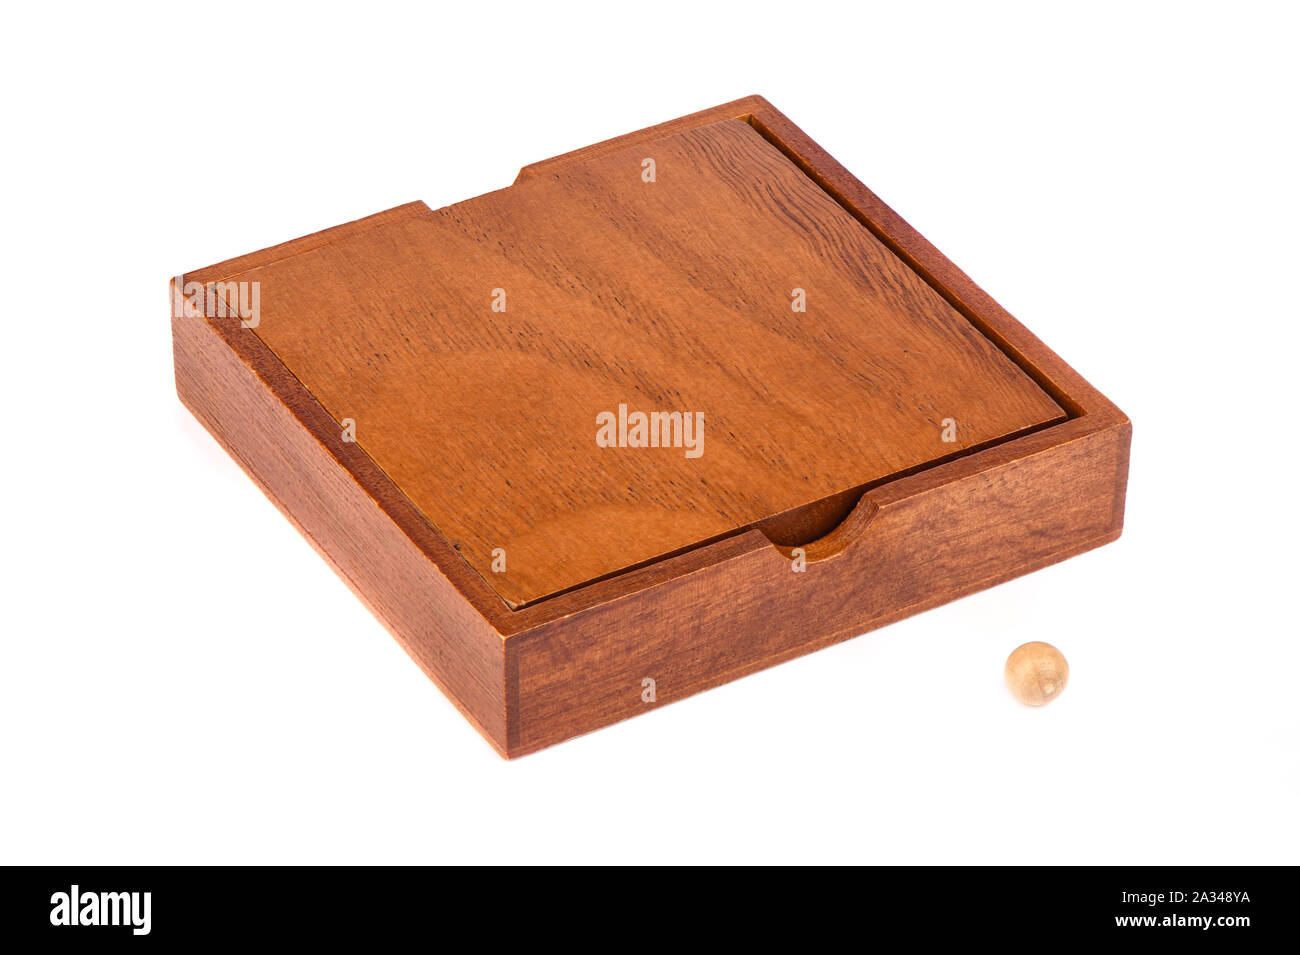 Wooden box and ball for playing Madagascar checkers over a white background. Madagascar checkers is a board game for one player. Board games concept. Stock Photo